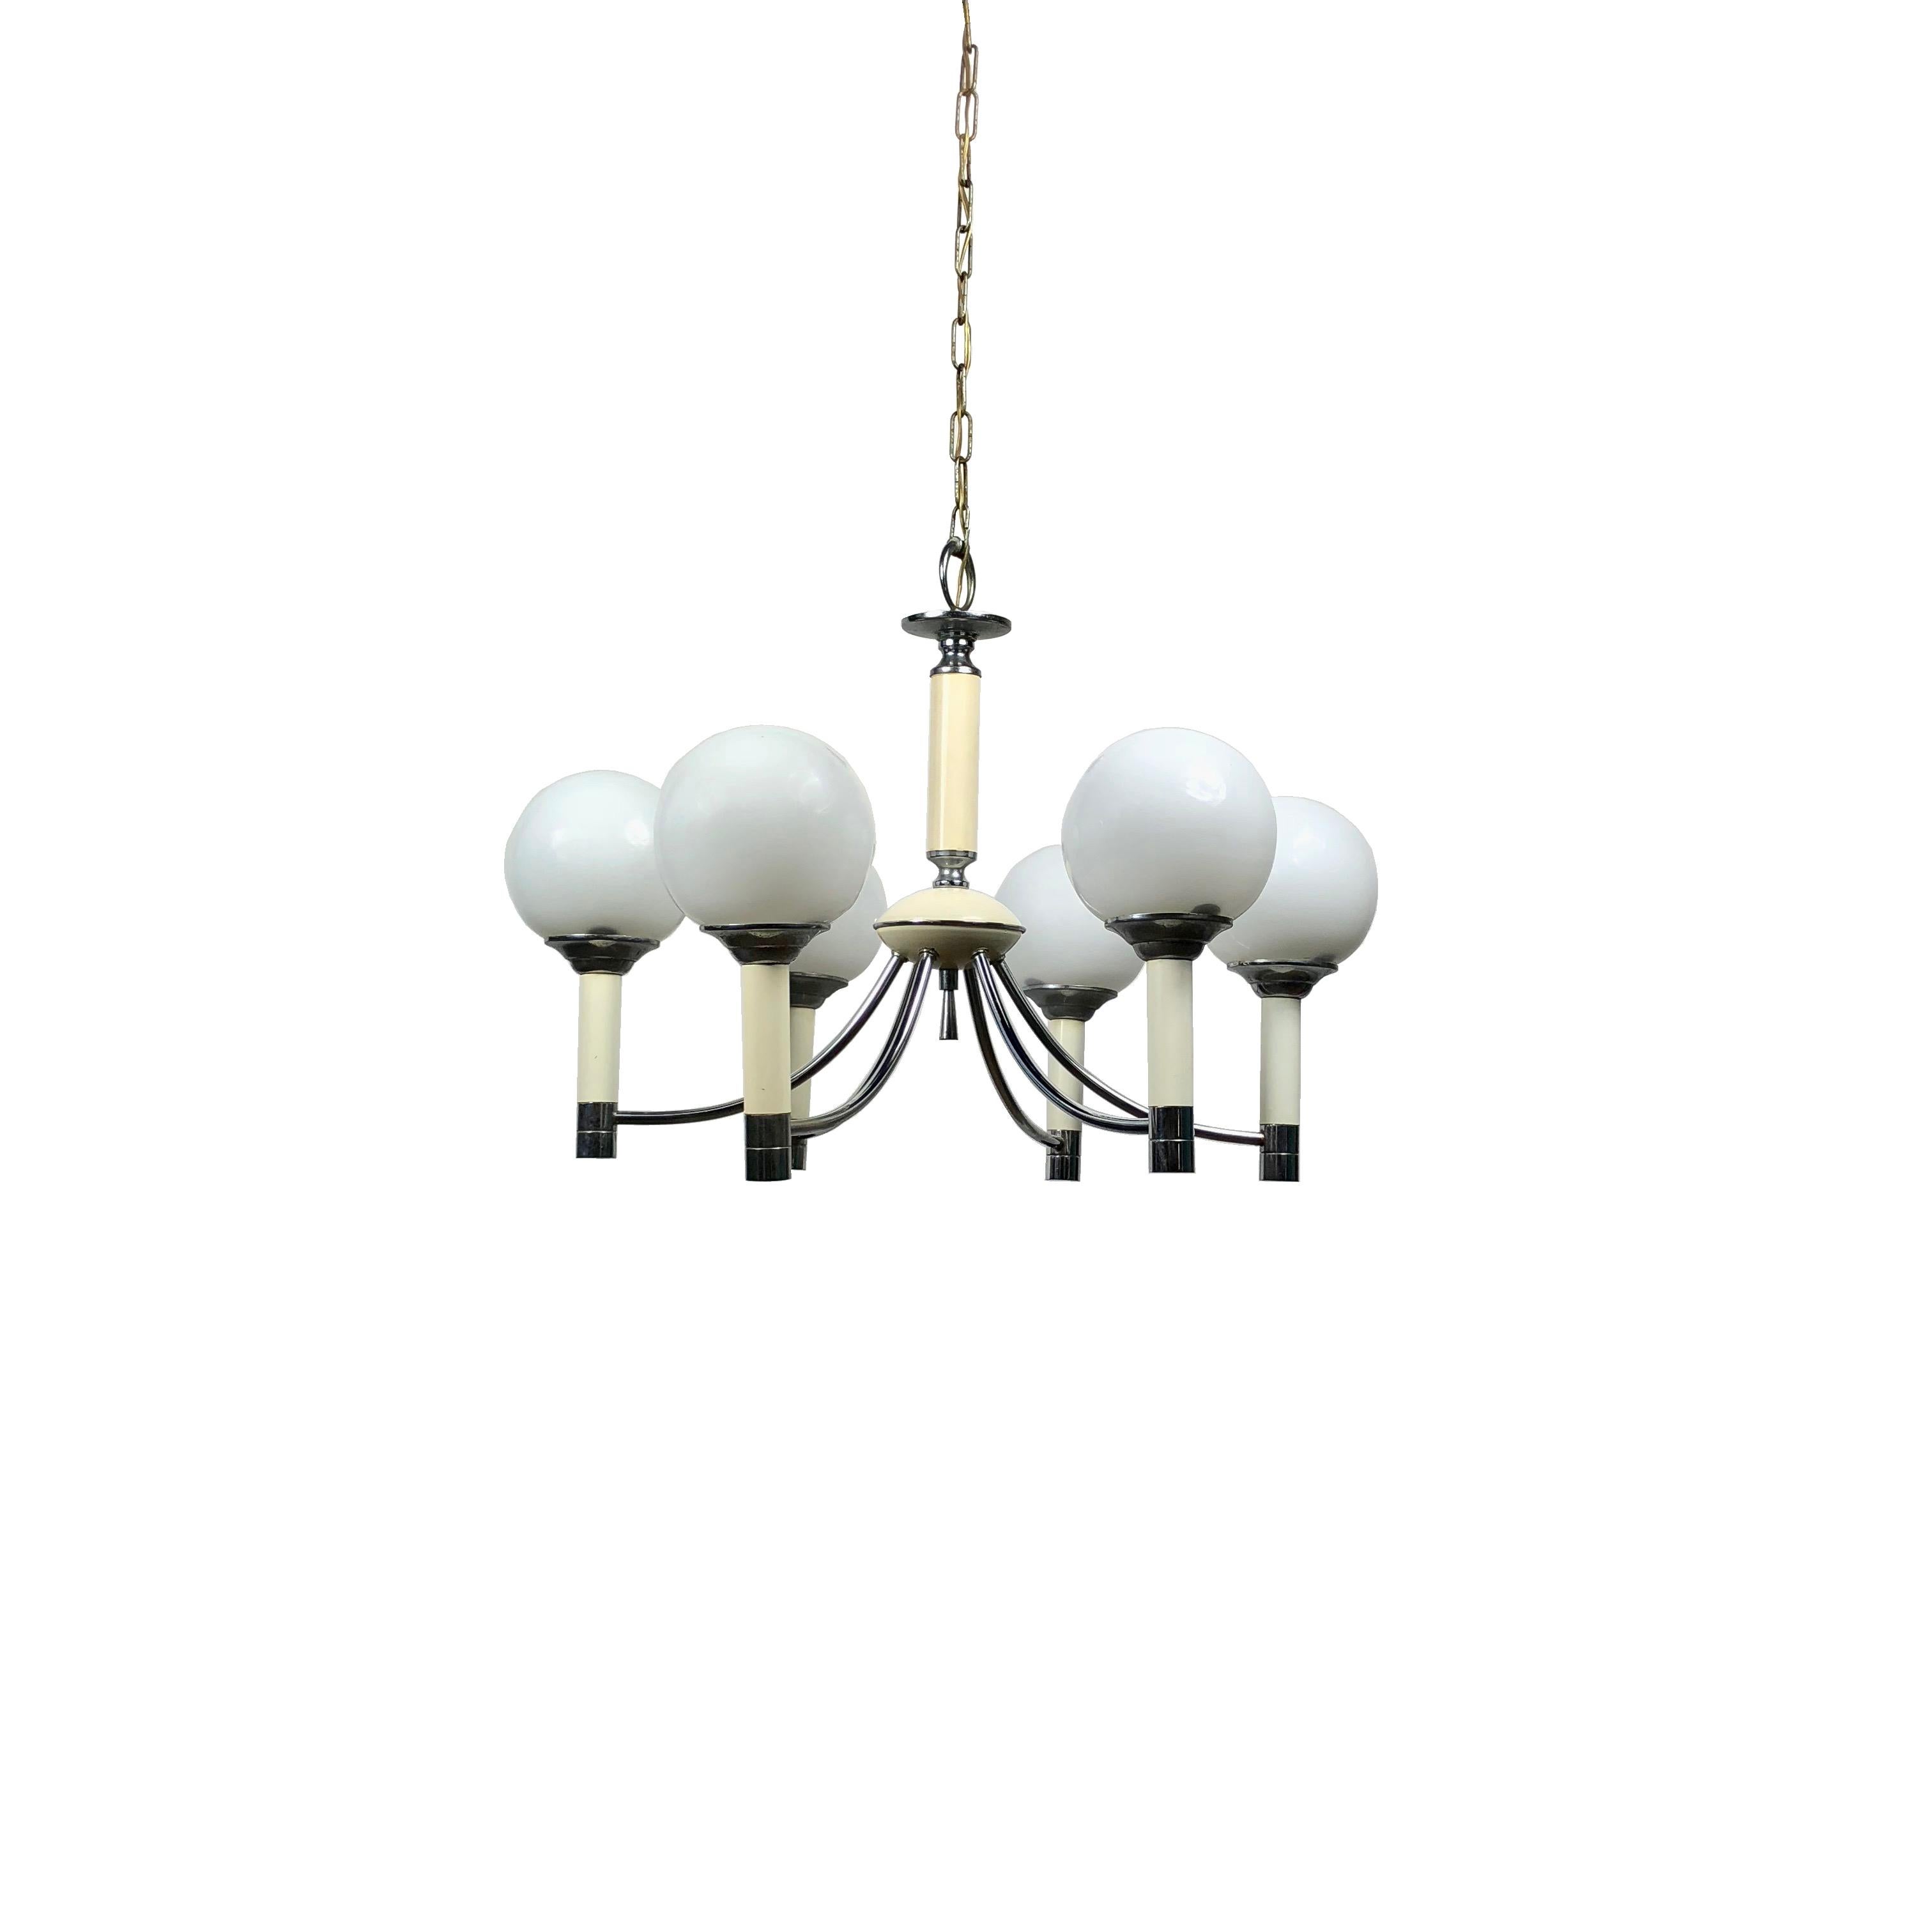 A Targetti cream enamel, chrome and frosted glass chandelier with six lights.